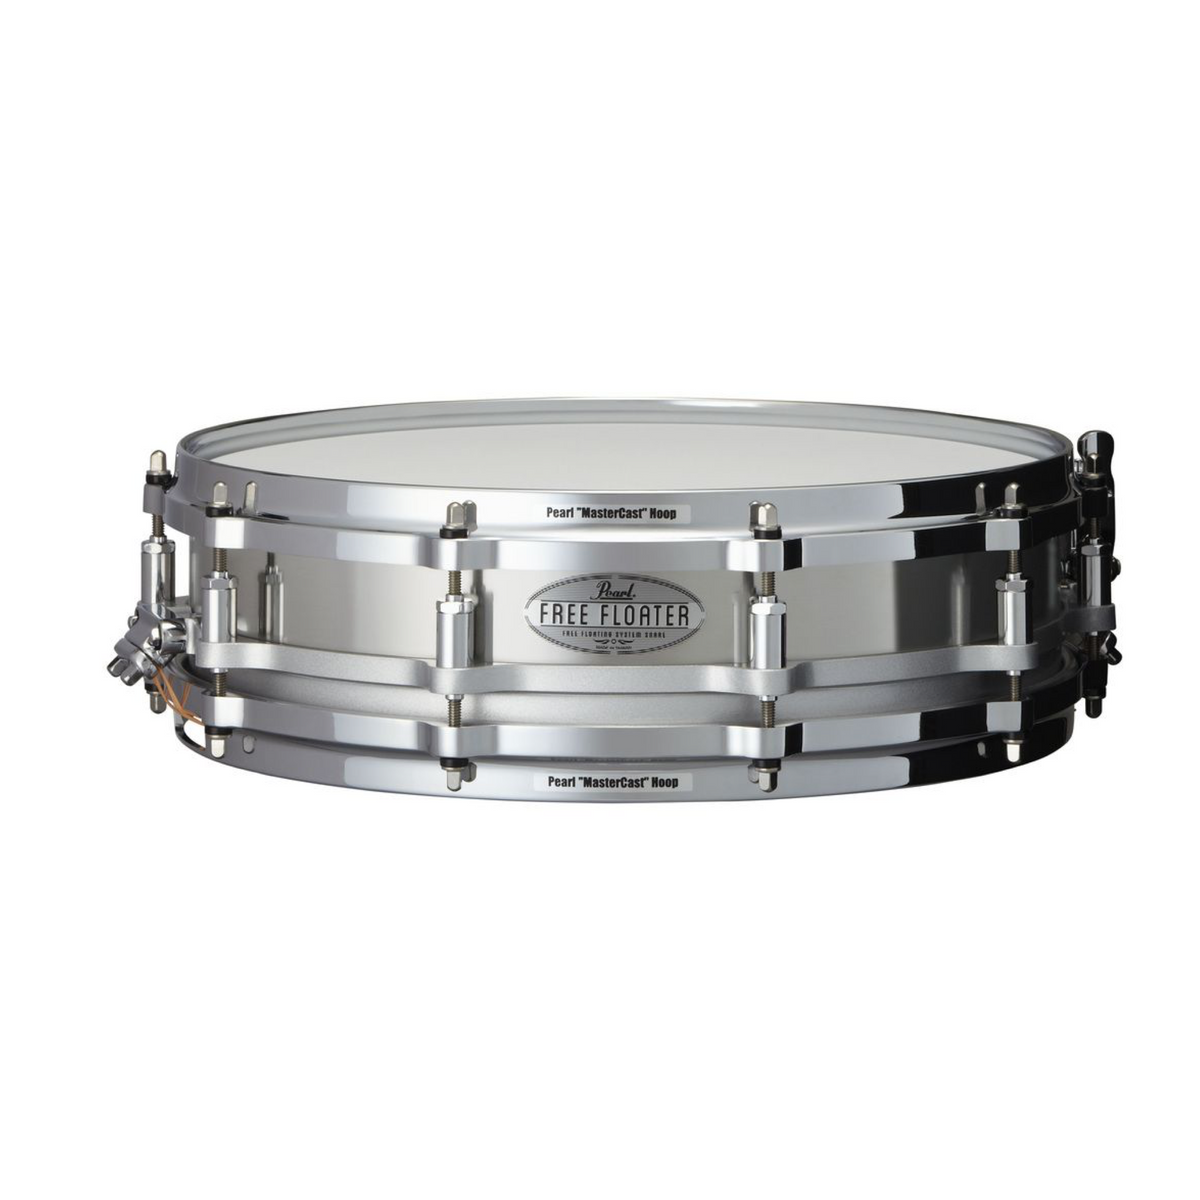 Pearl Free Floater Snares, Page 3